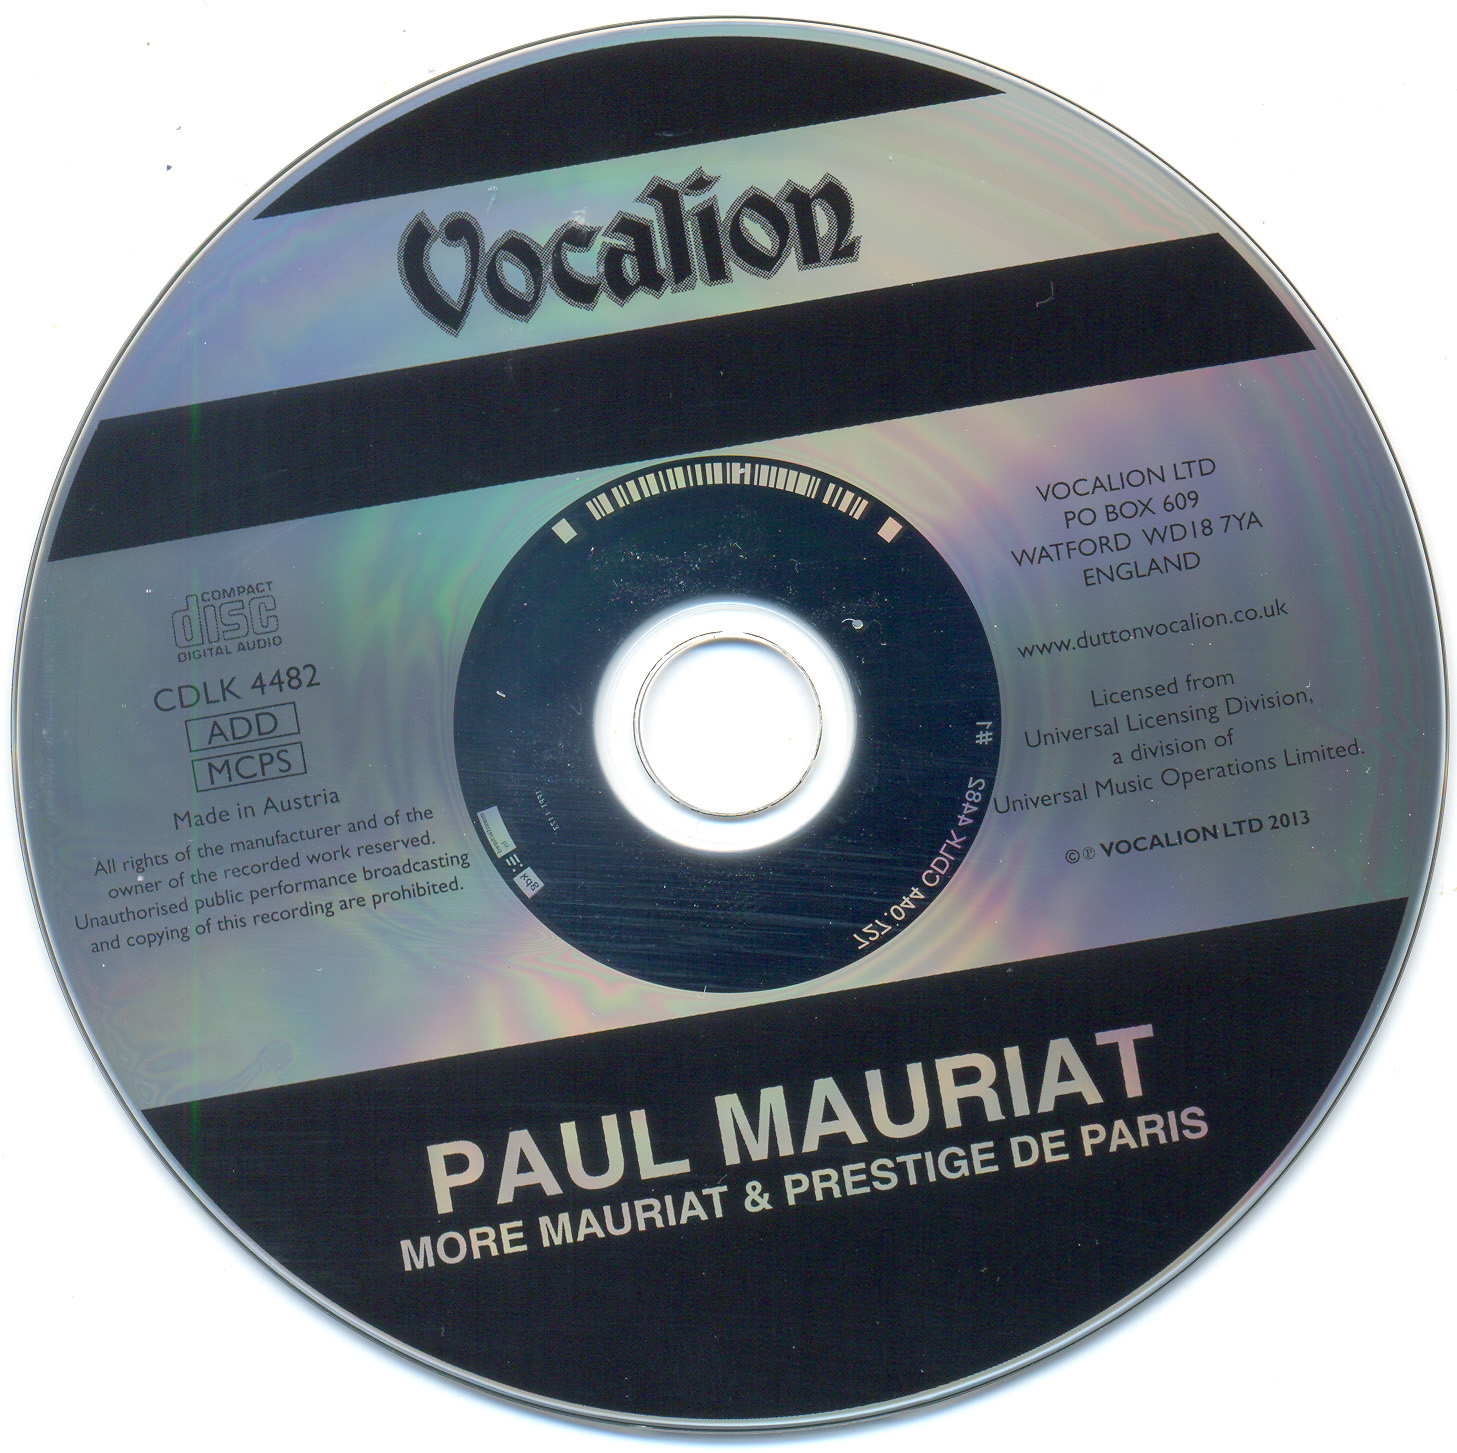 Paul mauriat mp3. The best of Paul Mauriat Disc Cover. The best of Paul Mauriat 10 CD Disc Cover.